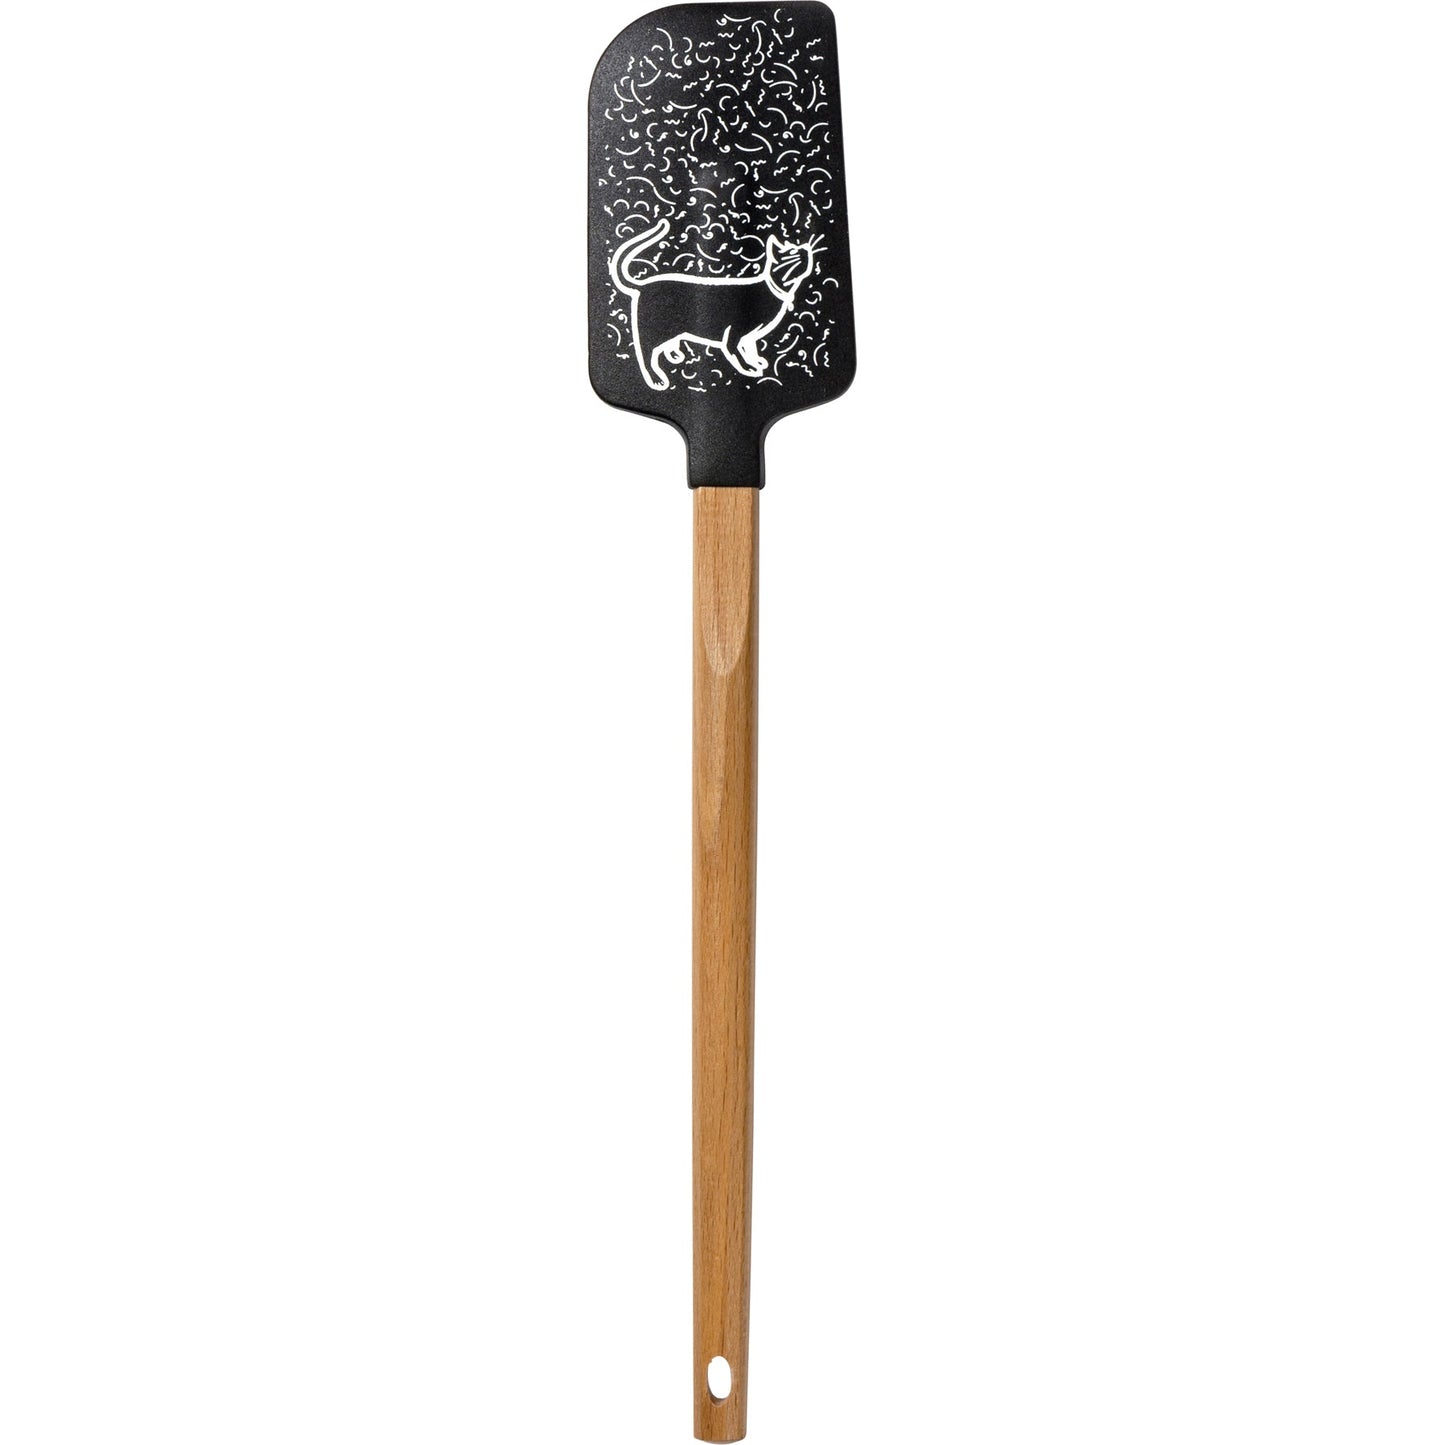 Cat Hair Is Part of The Recipe Spatula With A Wooden Handle